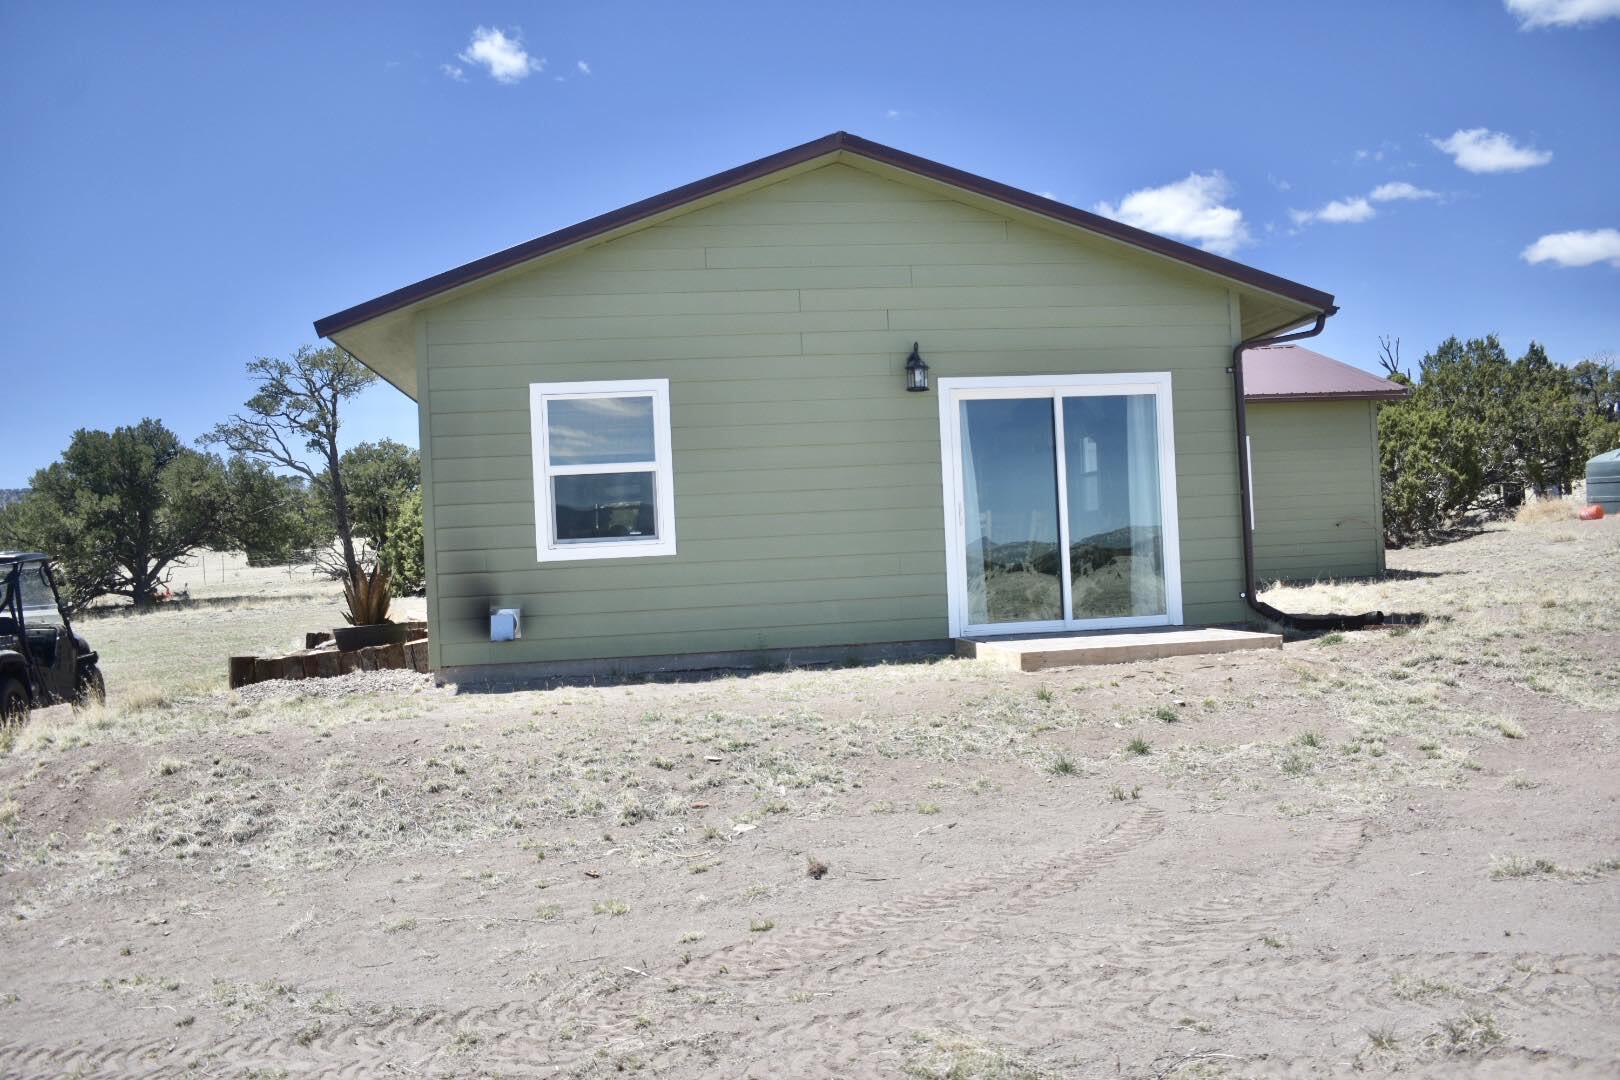 49 Windmill Road, Datil, New Mexico 87821, 2 Bedrooms Bedrooms, ,2 BathroomsBathrooms,Residential,For Sale,49 Windmill Road,1062001